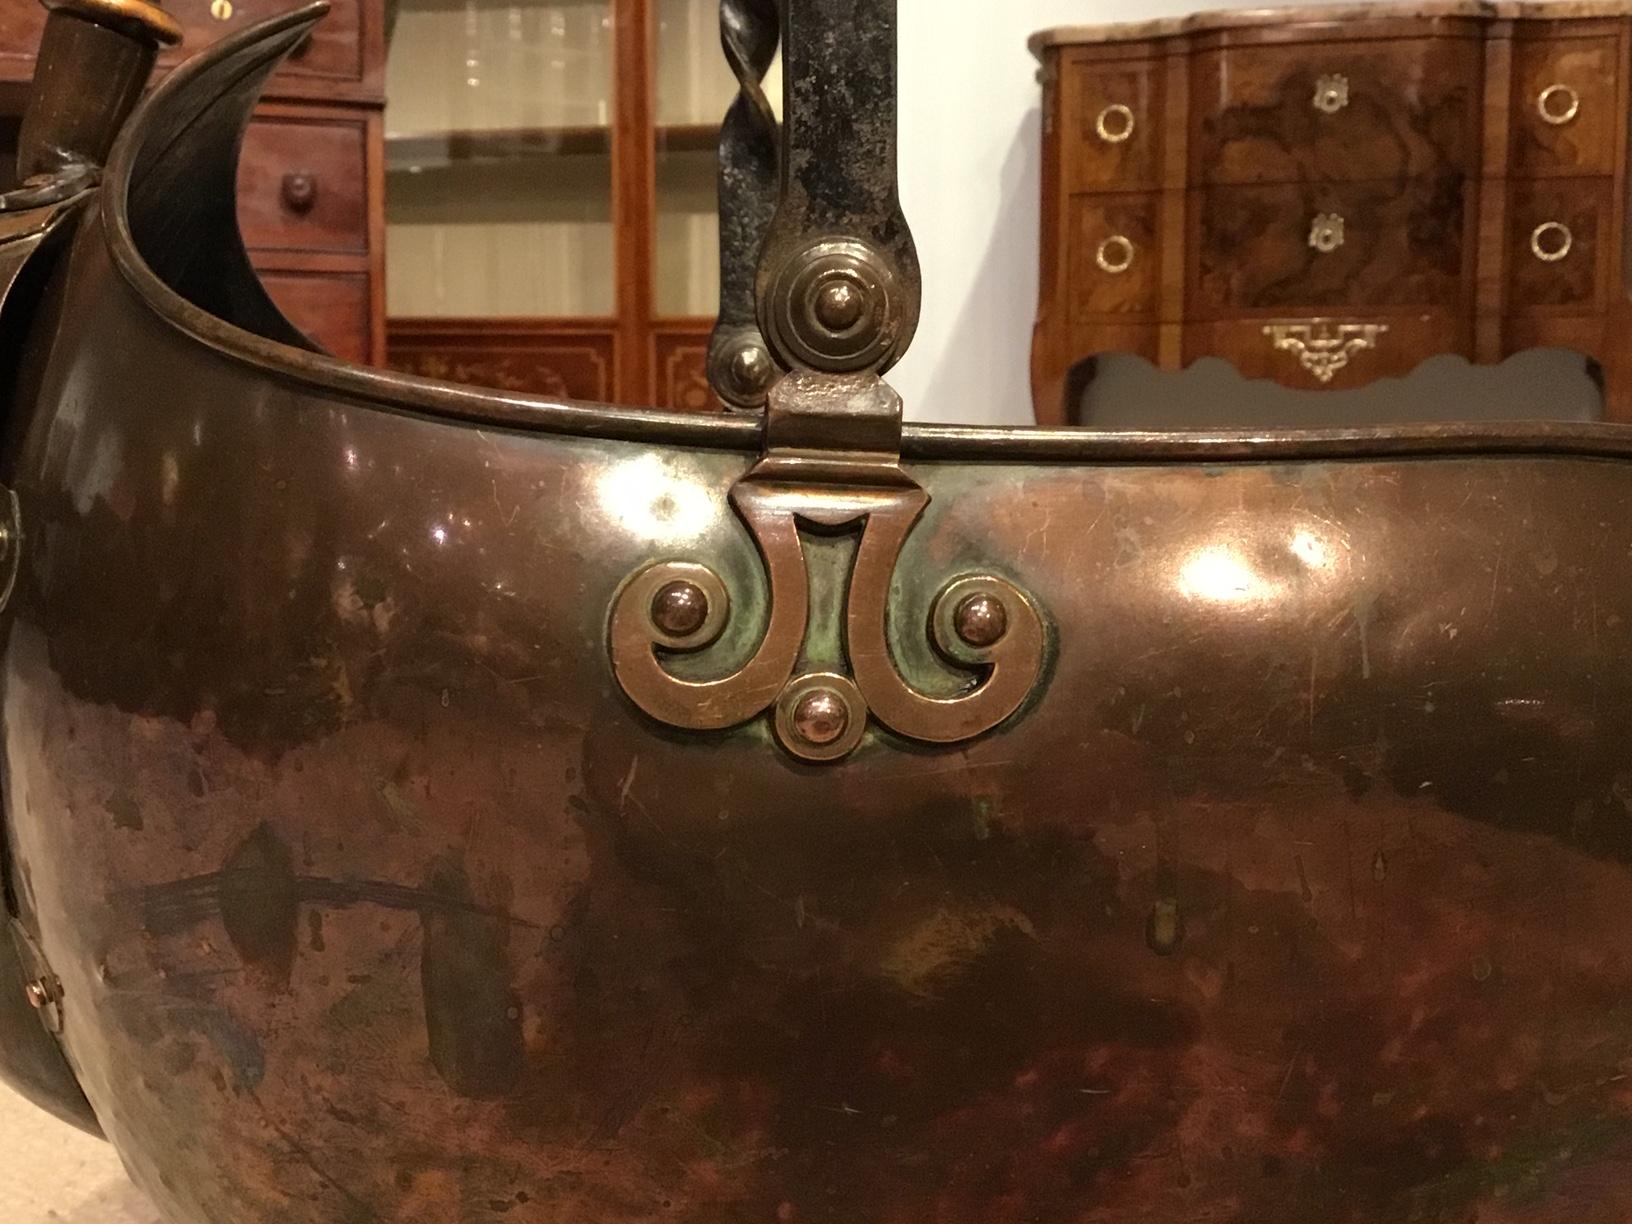 A patinated copper and iron Arts & Crafts Period coal scuttle. Having a wrought iron handle, patinated copper body and scoop. Supported on an Arts and Crafts inspired wrought iron base. Stamped RD 127757, England, circa 1890-1900

Dimensions: 21